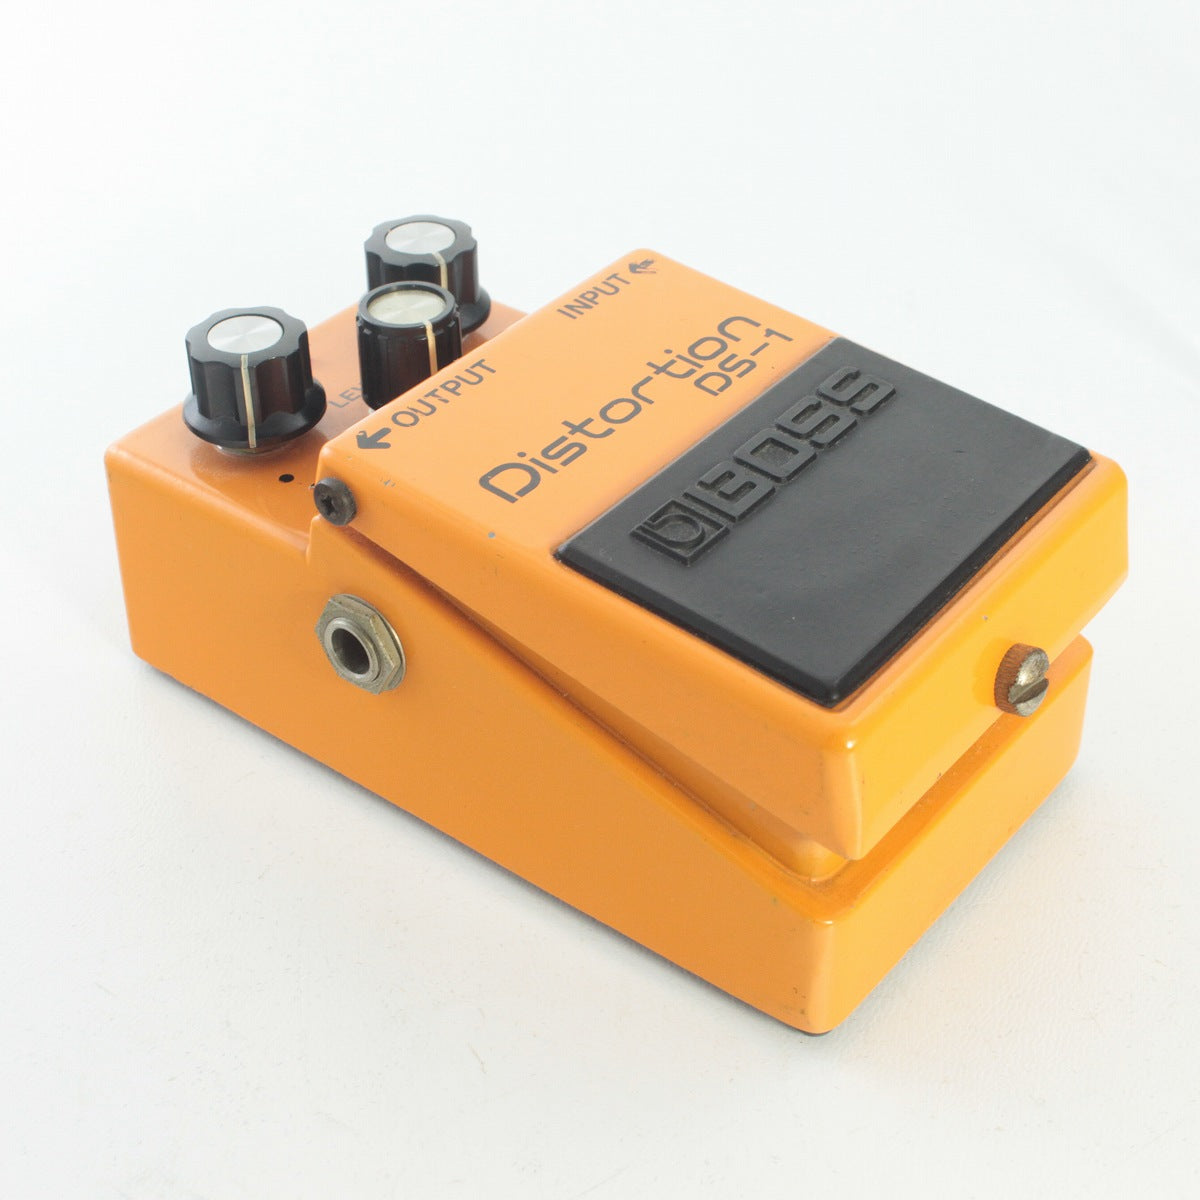 [SN 8200] USED BOSS / DS-1 Distortion Made in Japan 1979 [03]